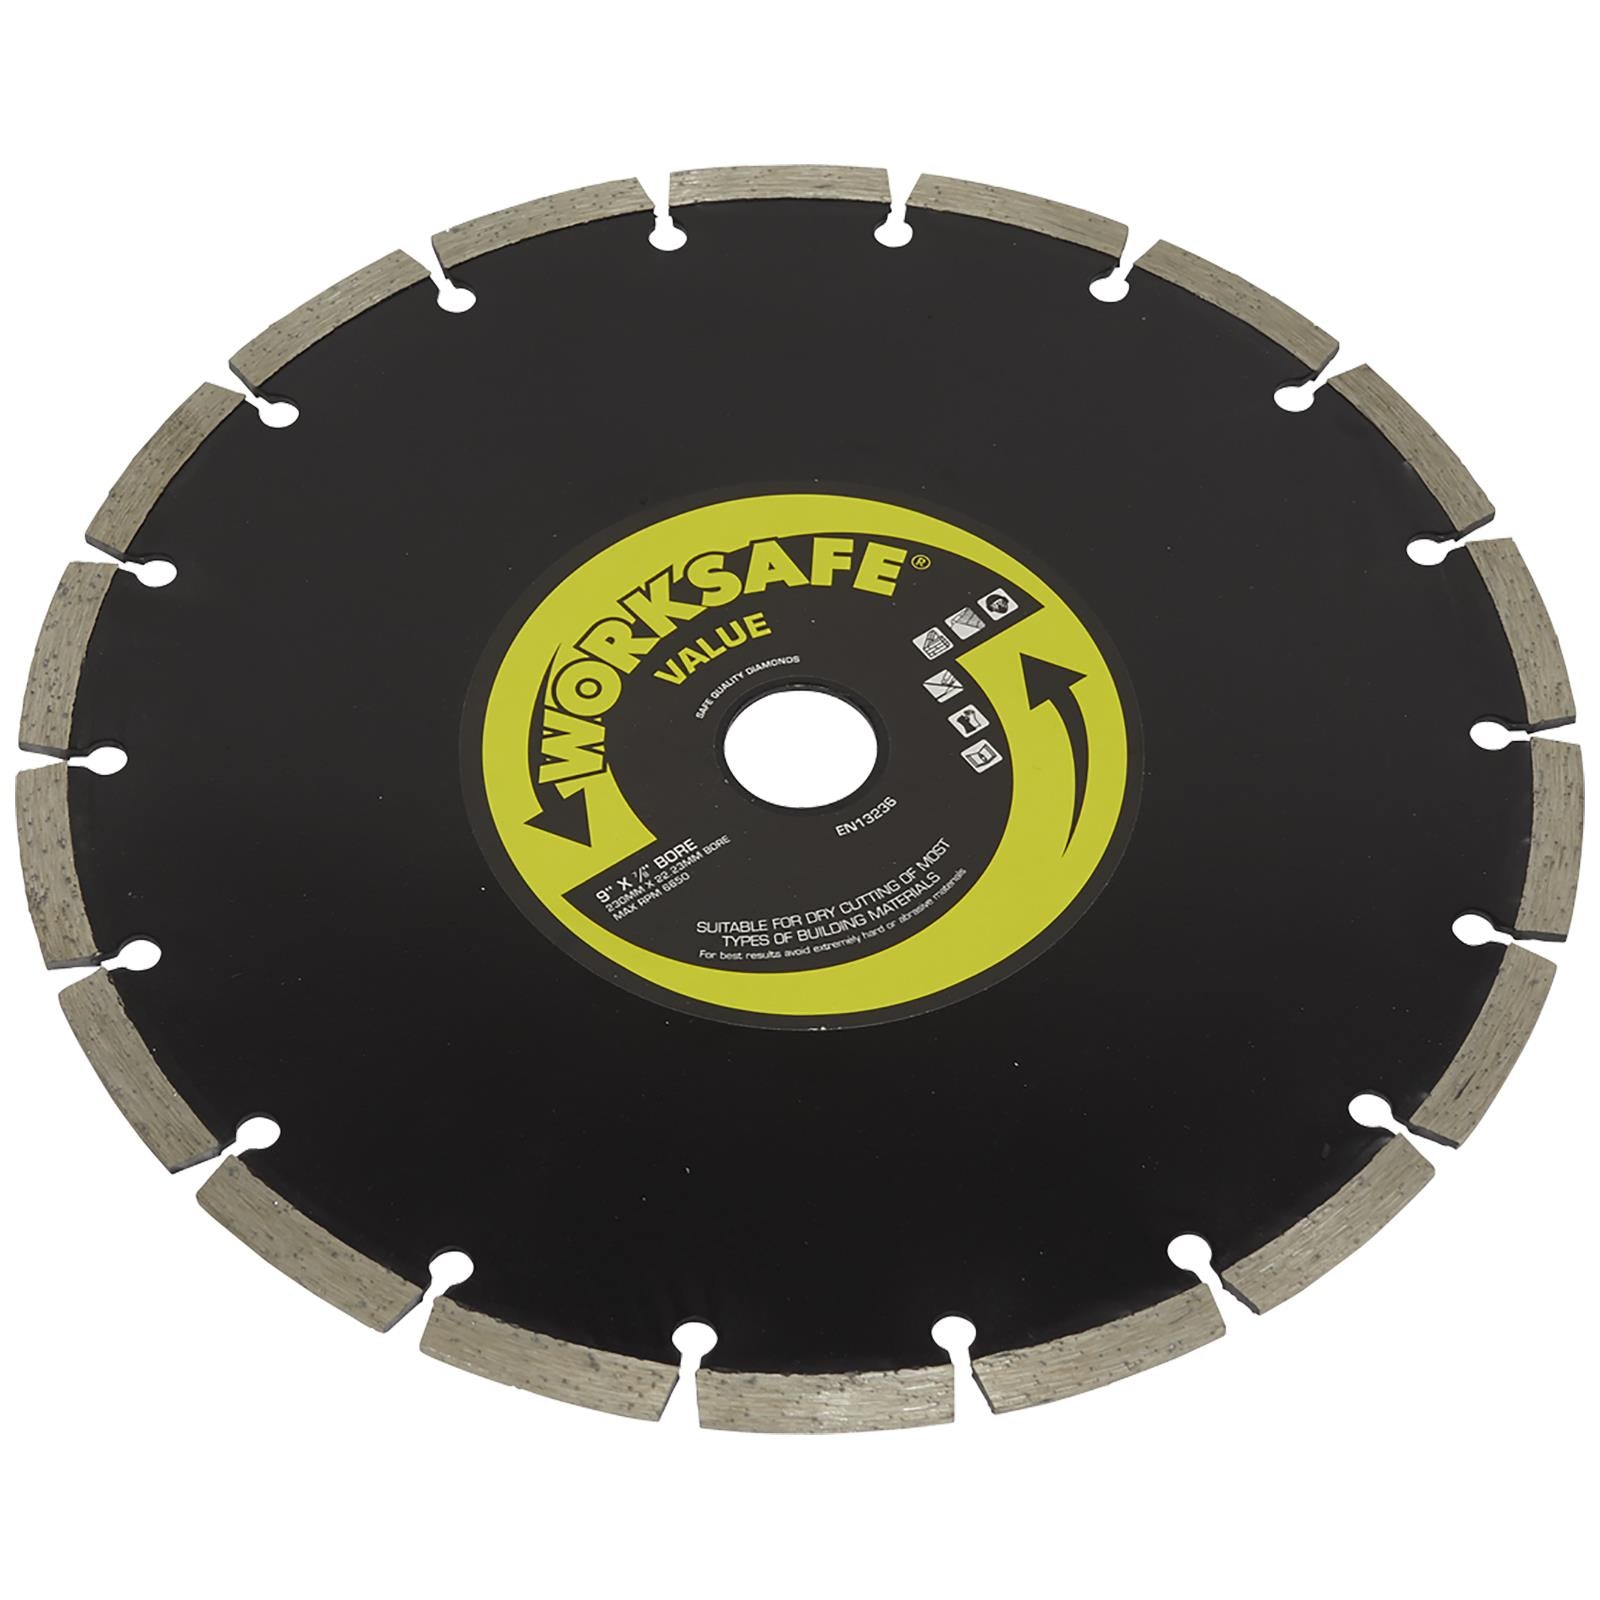 Worksafe by Sealey Diamond Cutting Blade 230mm x 22.23mm Bore Value